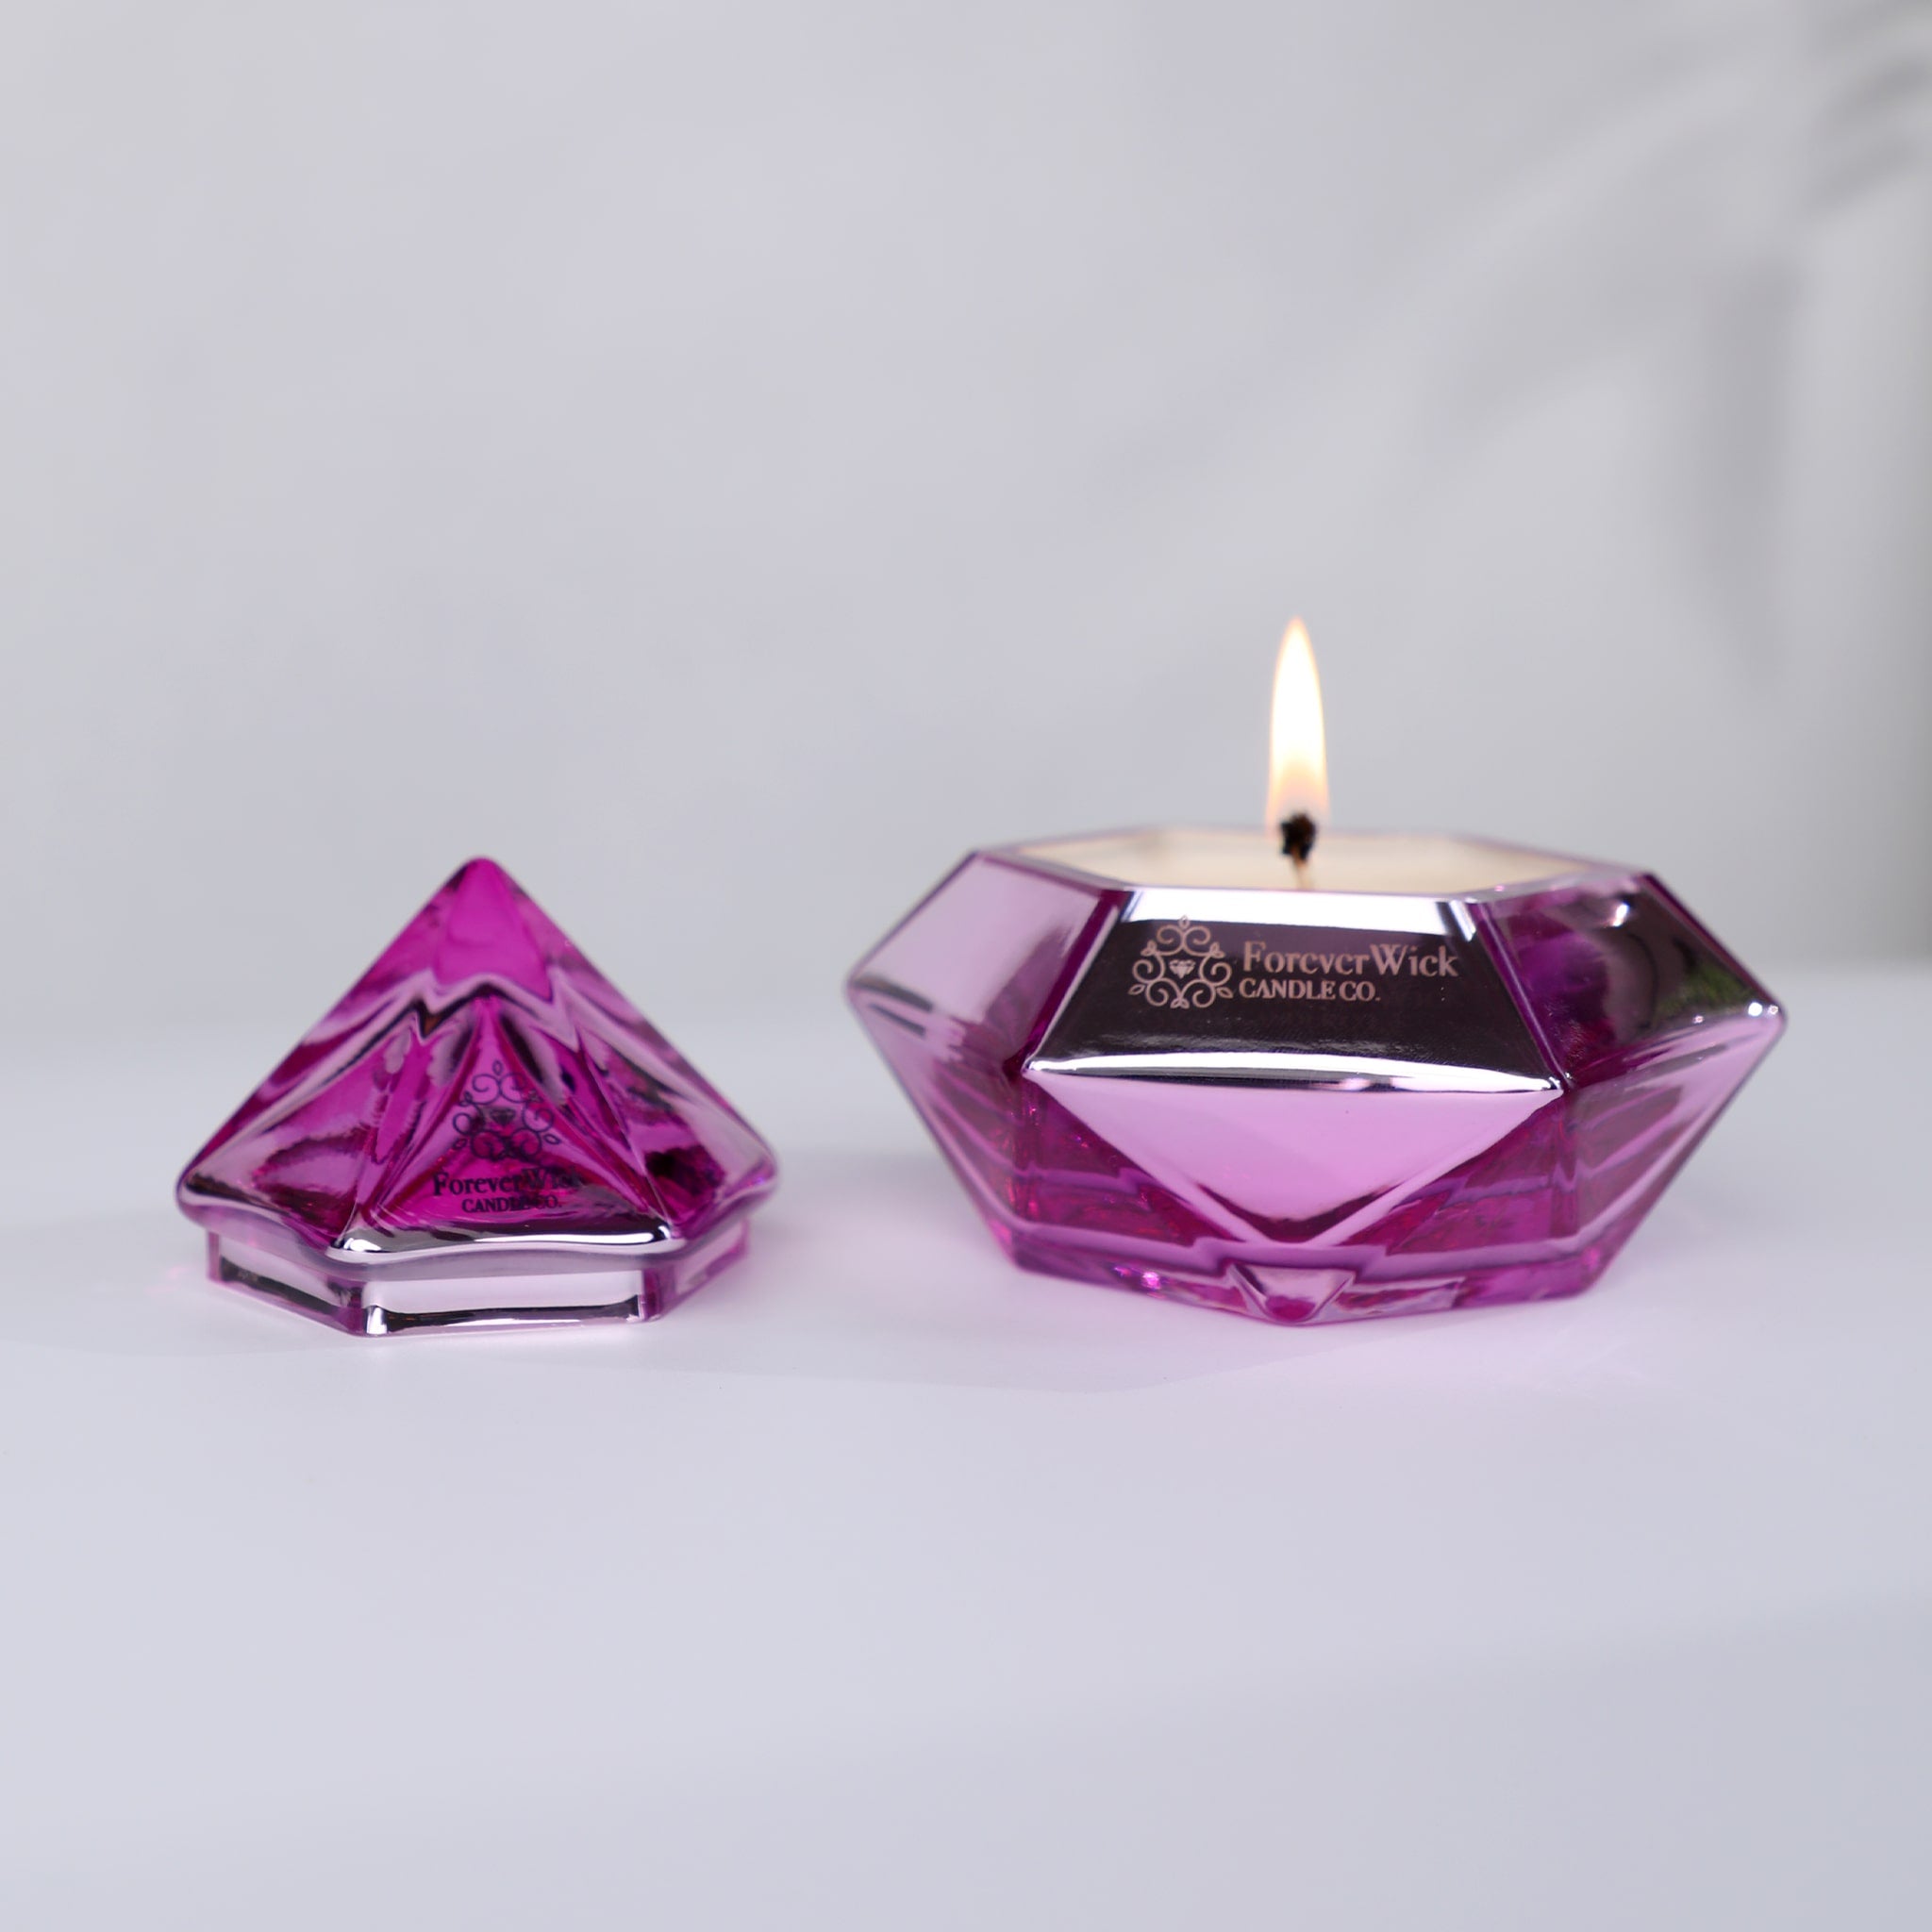 The Pink Diamond Candle